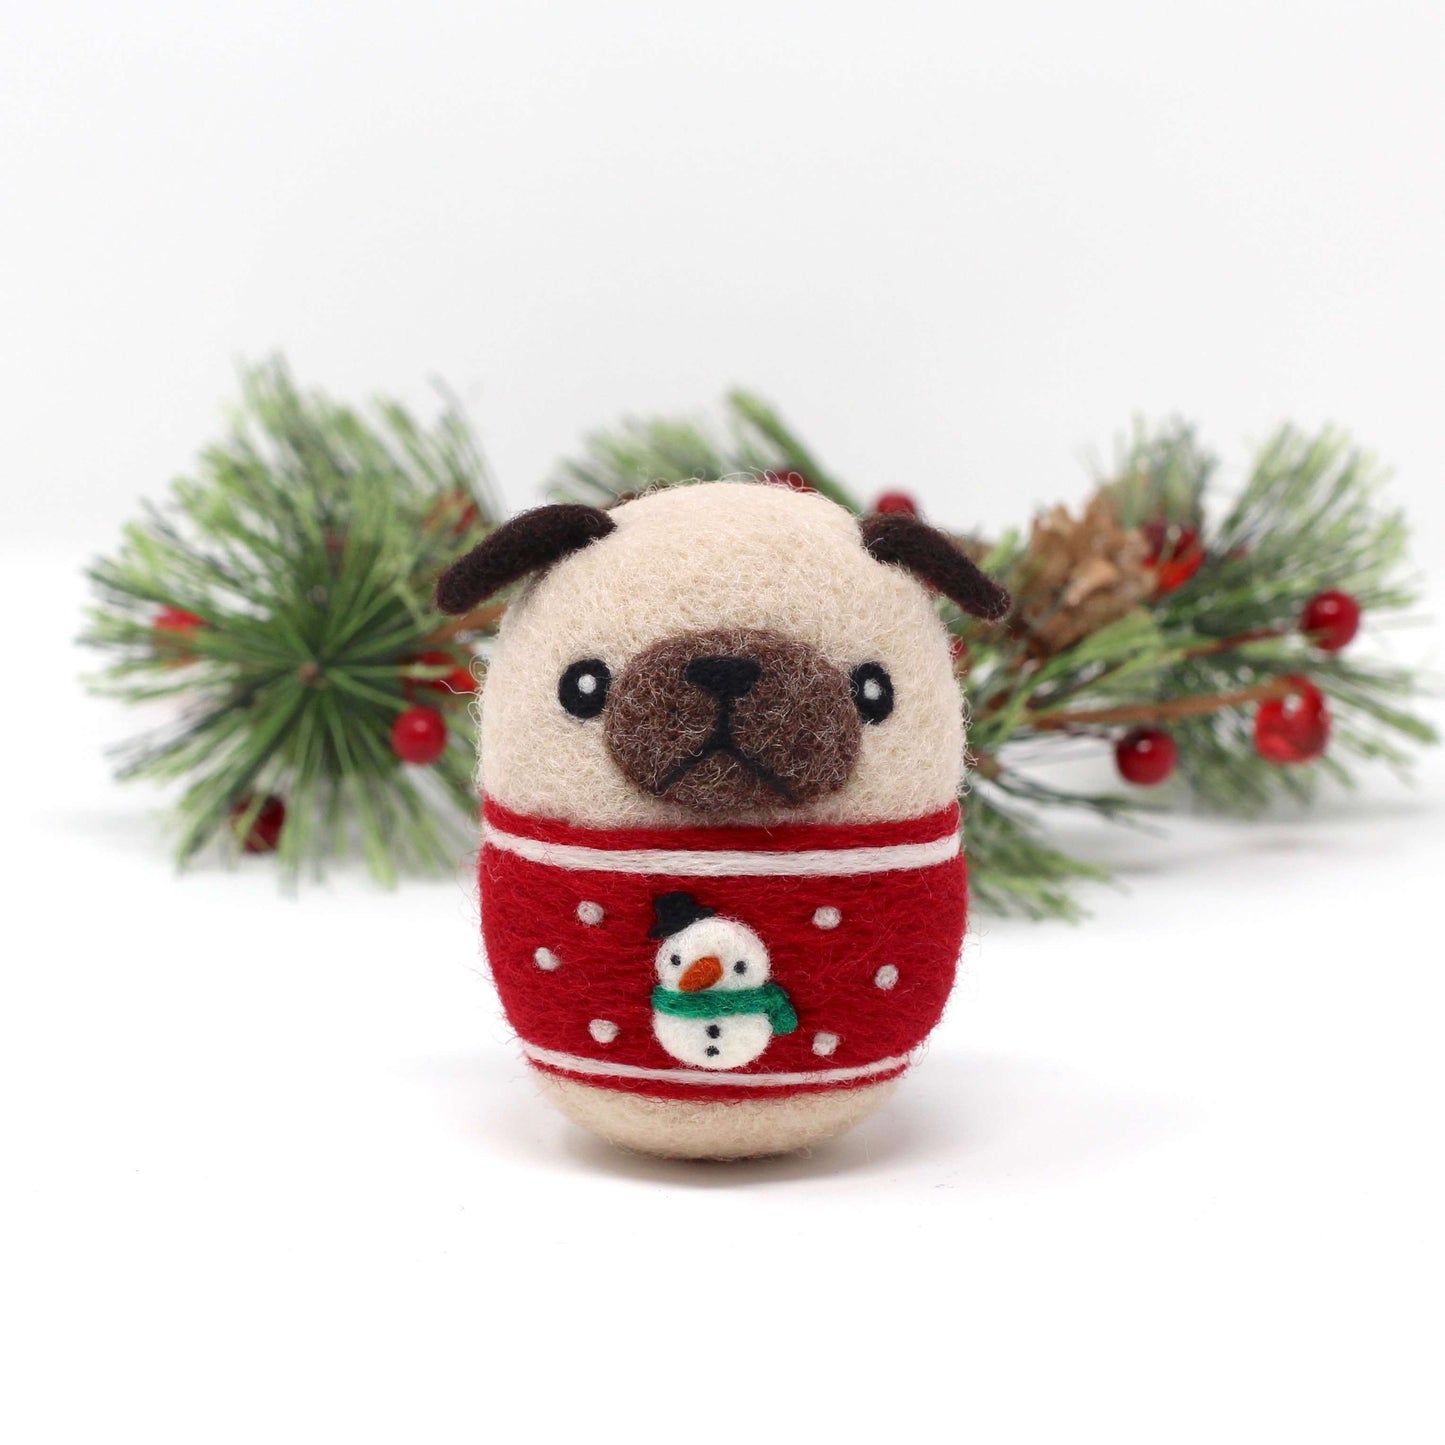 Needle Felted Pug in Red Snowman Christmas Sweater by Wild Whimsy Woolies